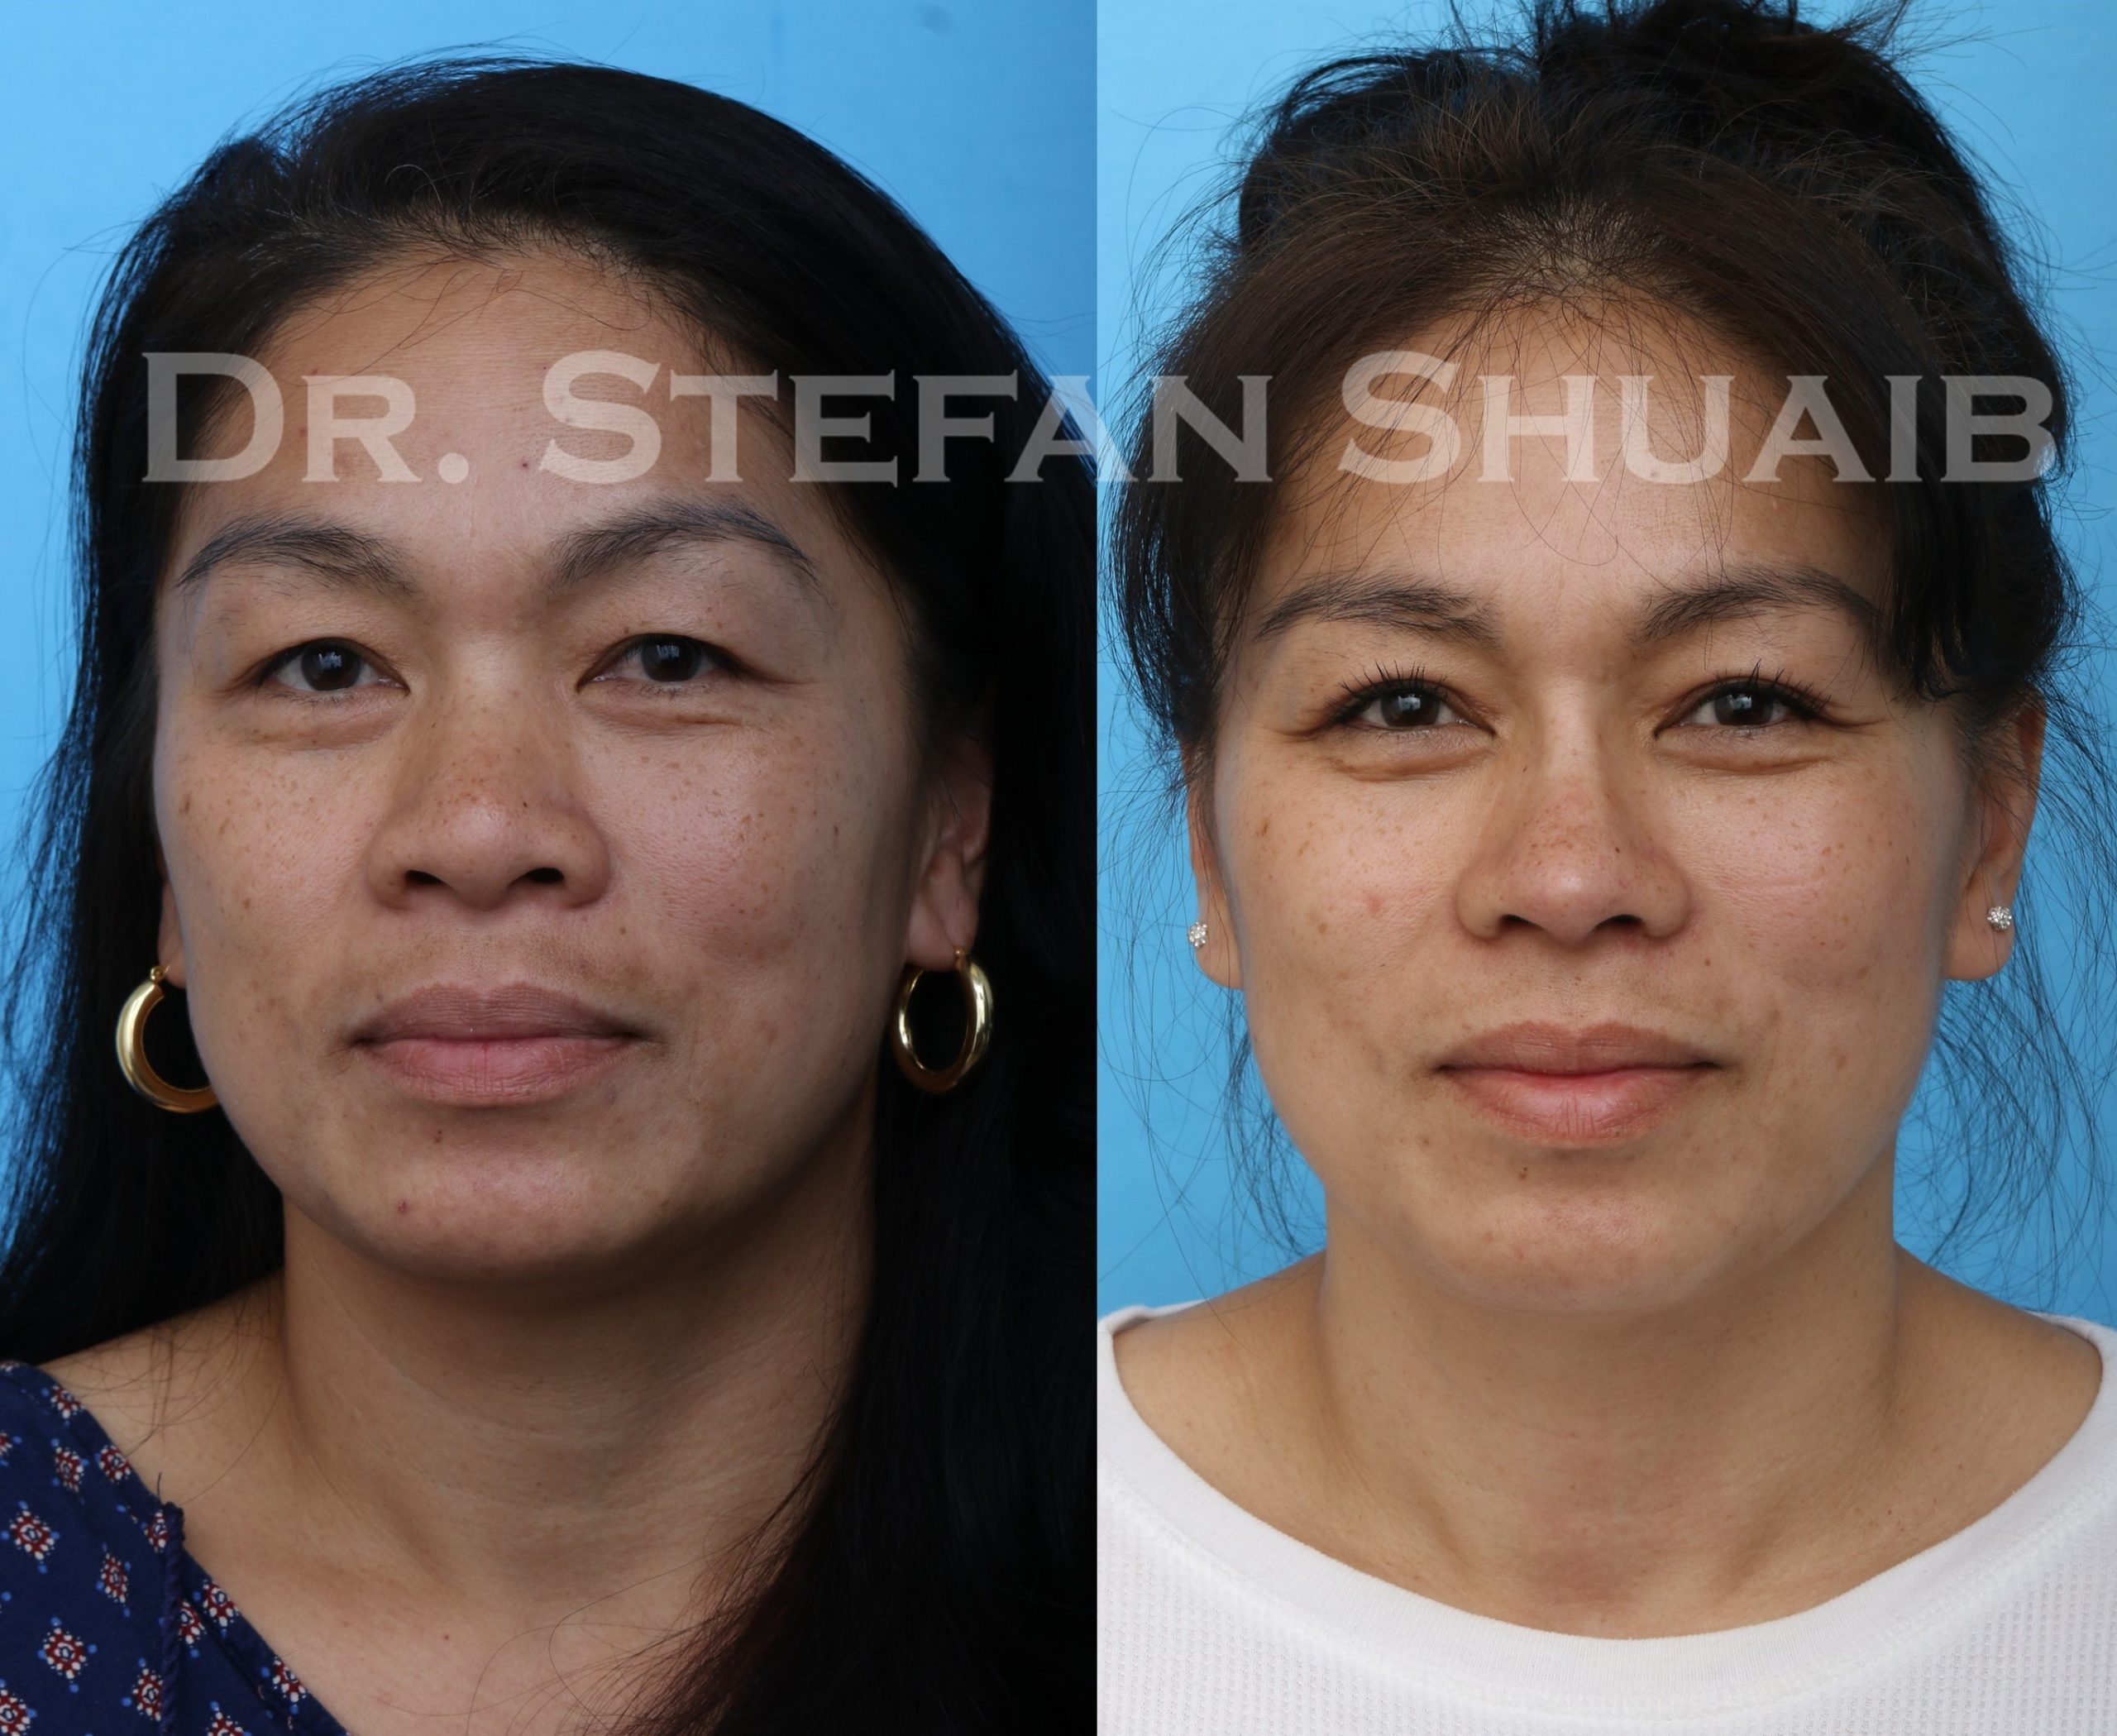 Patient before and after augmentation rhinoplasty as well as upper and lower blepharoplasty